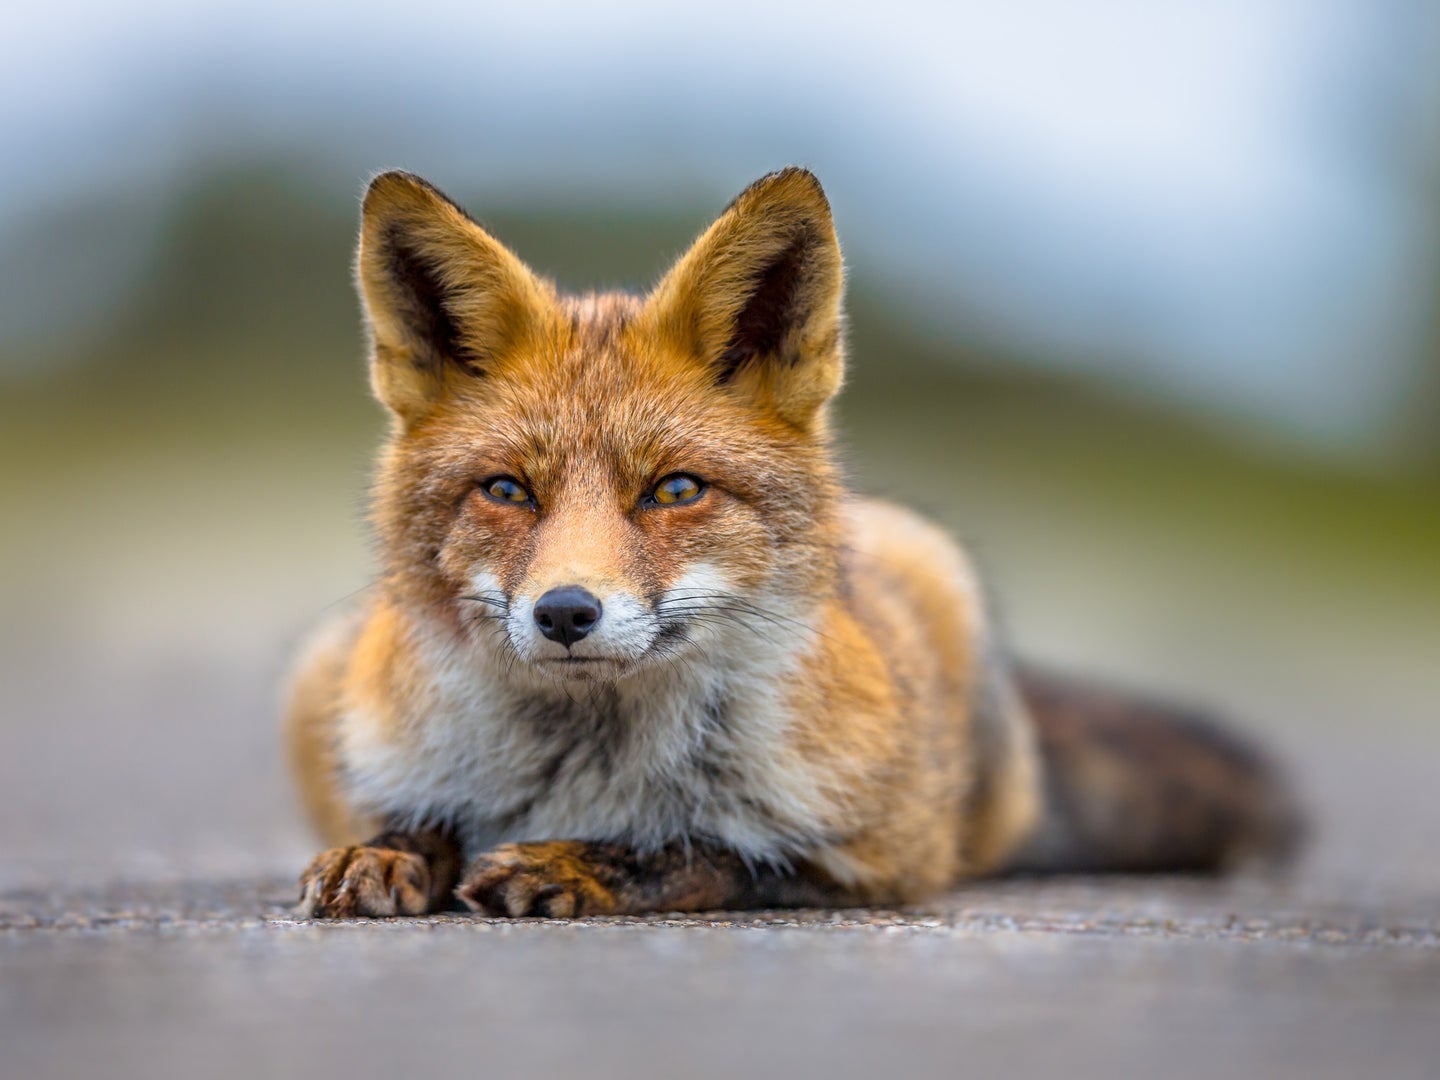 European red fox crouched on concrete and looking directly into the camera